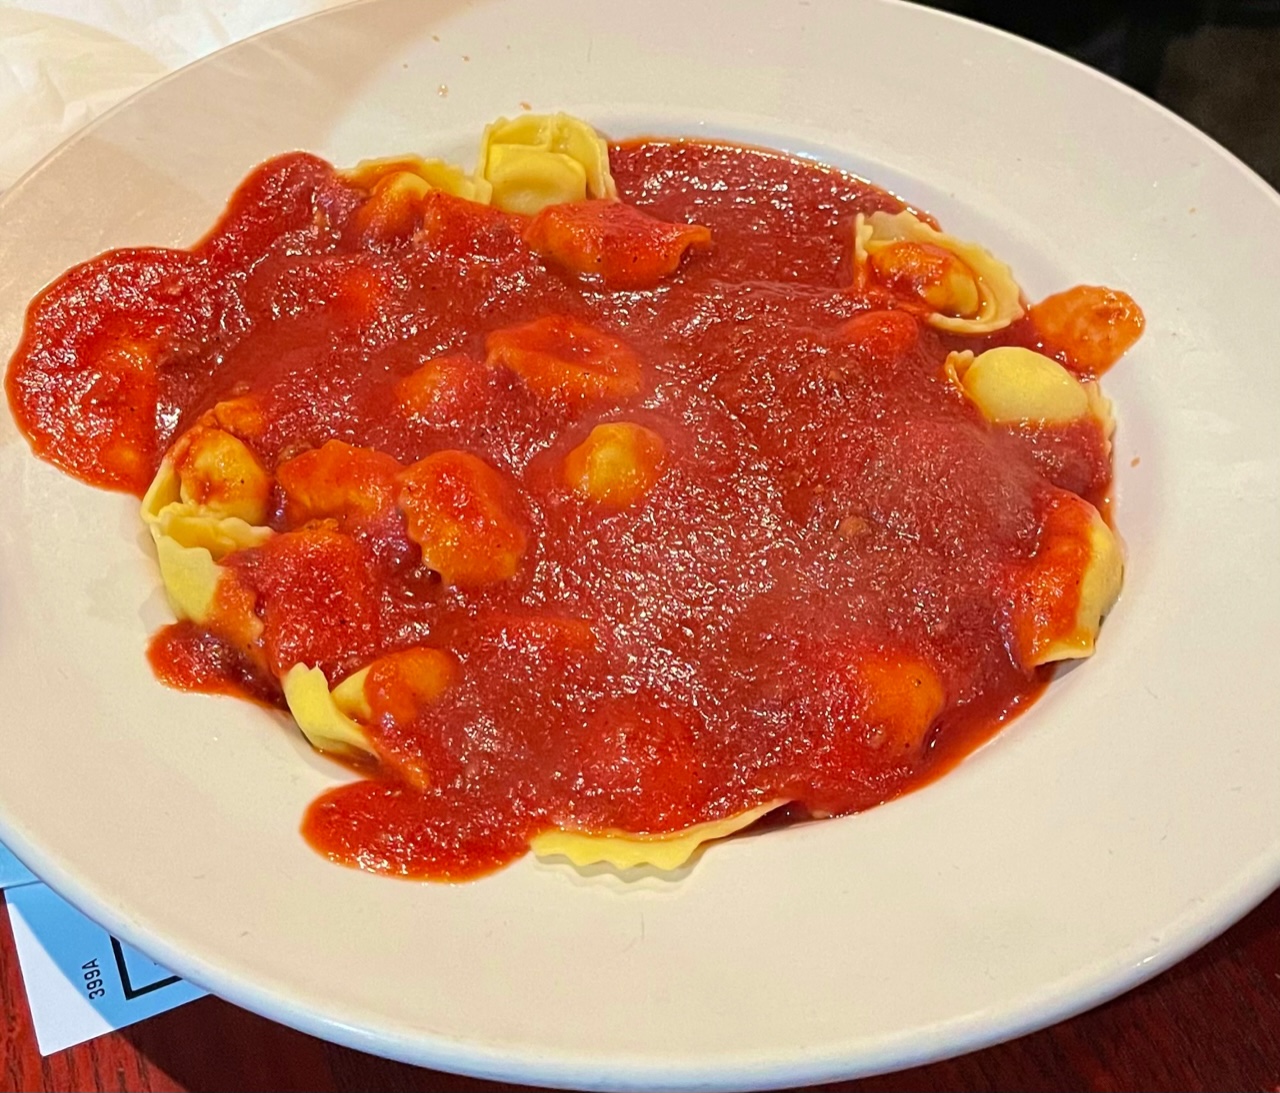 Filippo's order of tortellinni with meat sauce in a white bowl. Photo by Stephanie Wheatley.